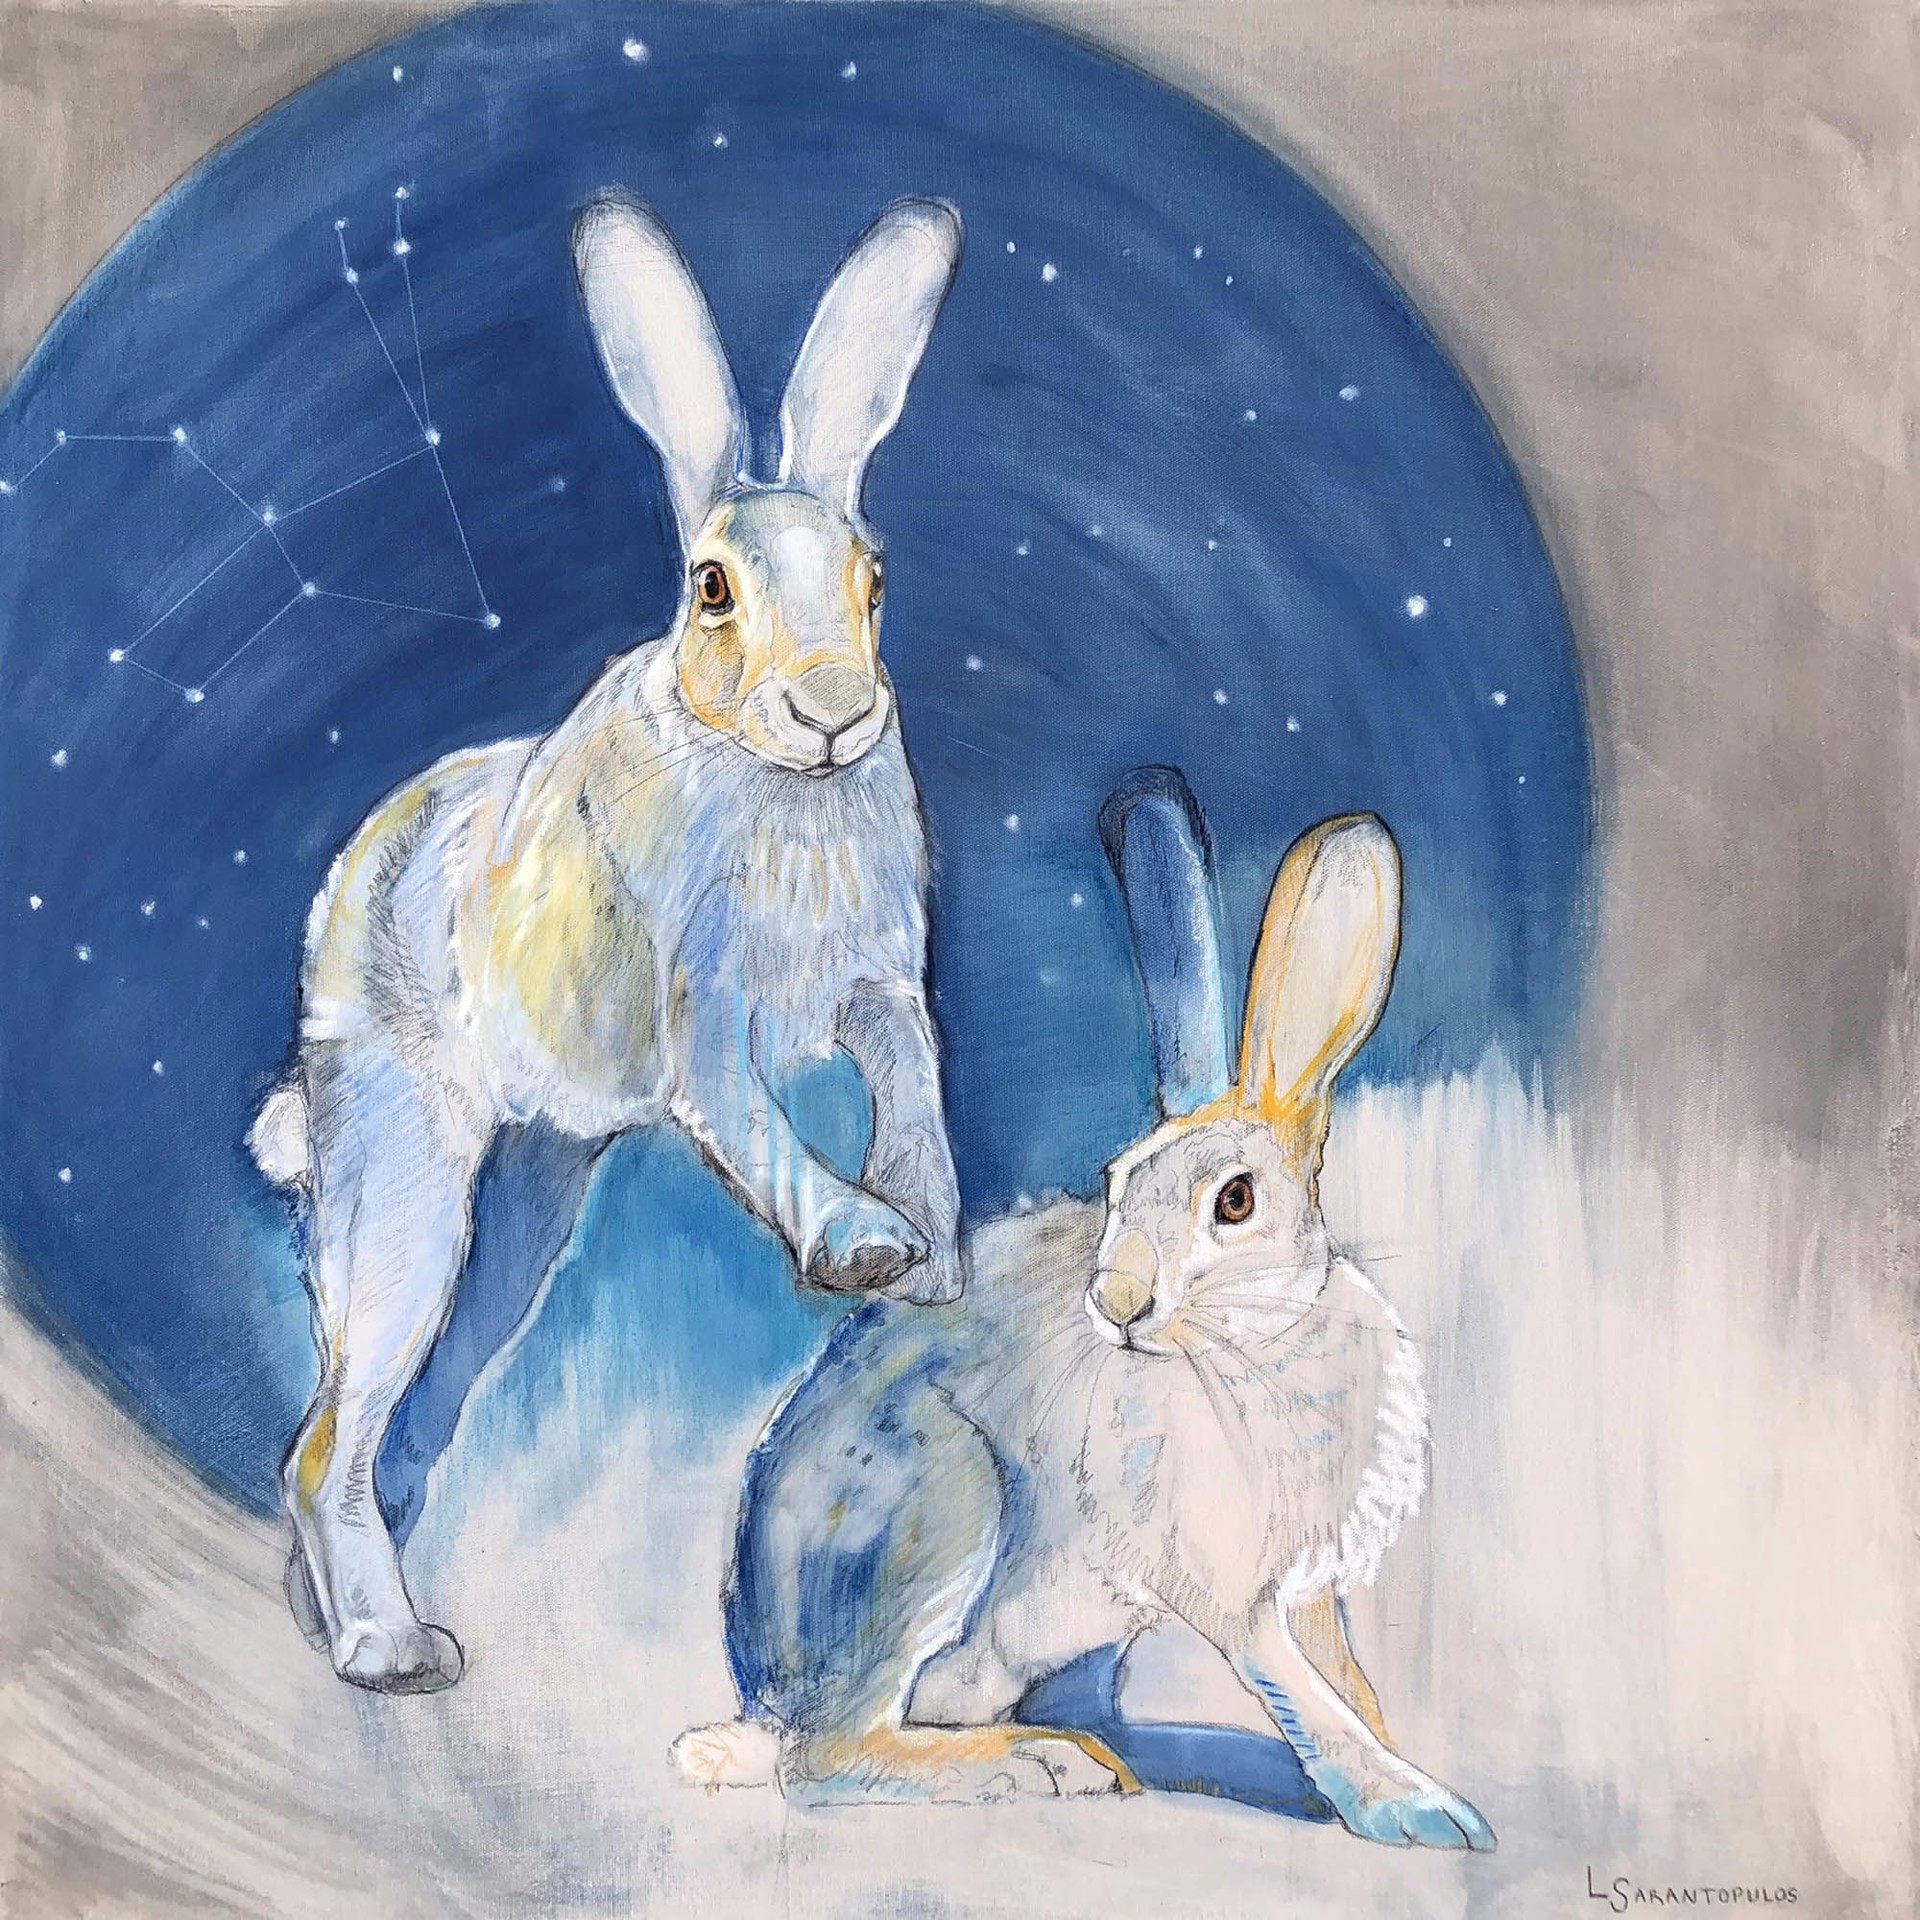 Original Mixed Media Painting Featuring Two Rabbits On Abstract Gray Background With Large Blue Circle And Constellation Detail